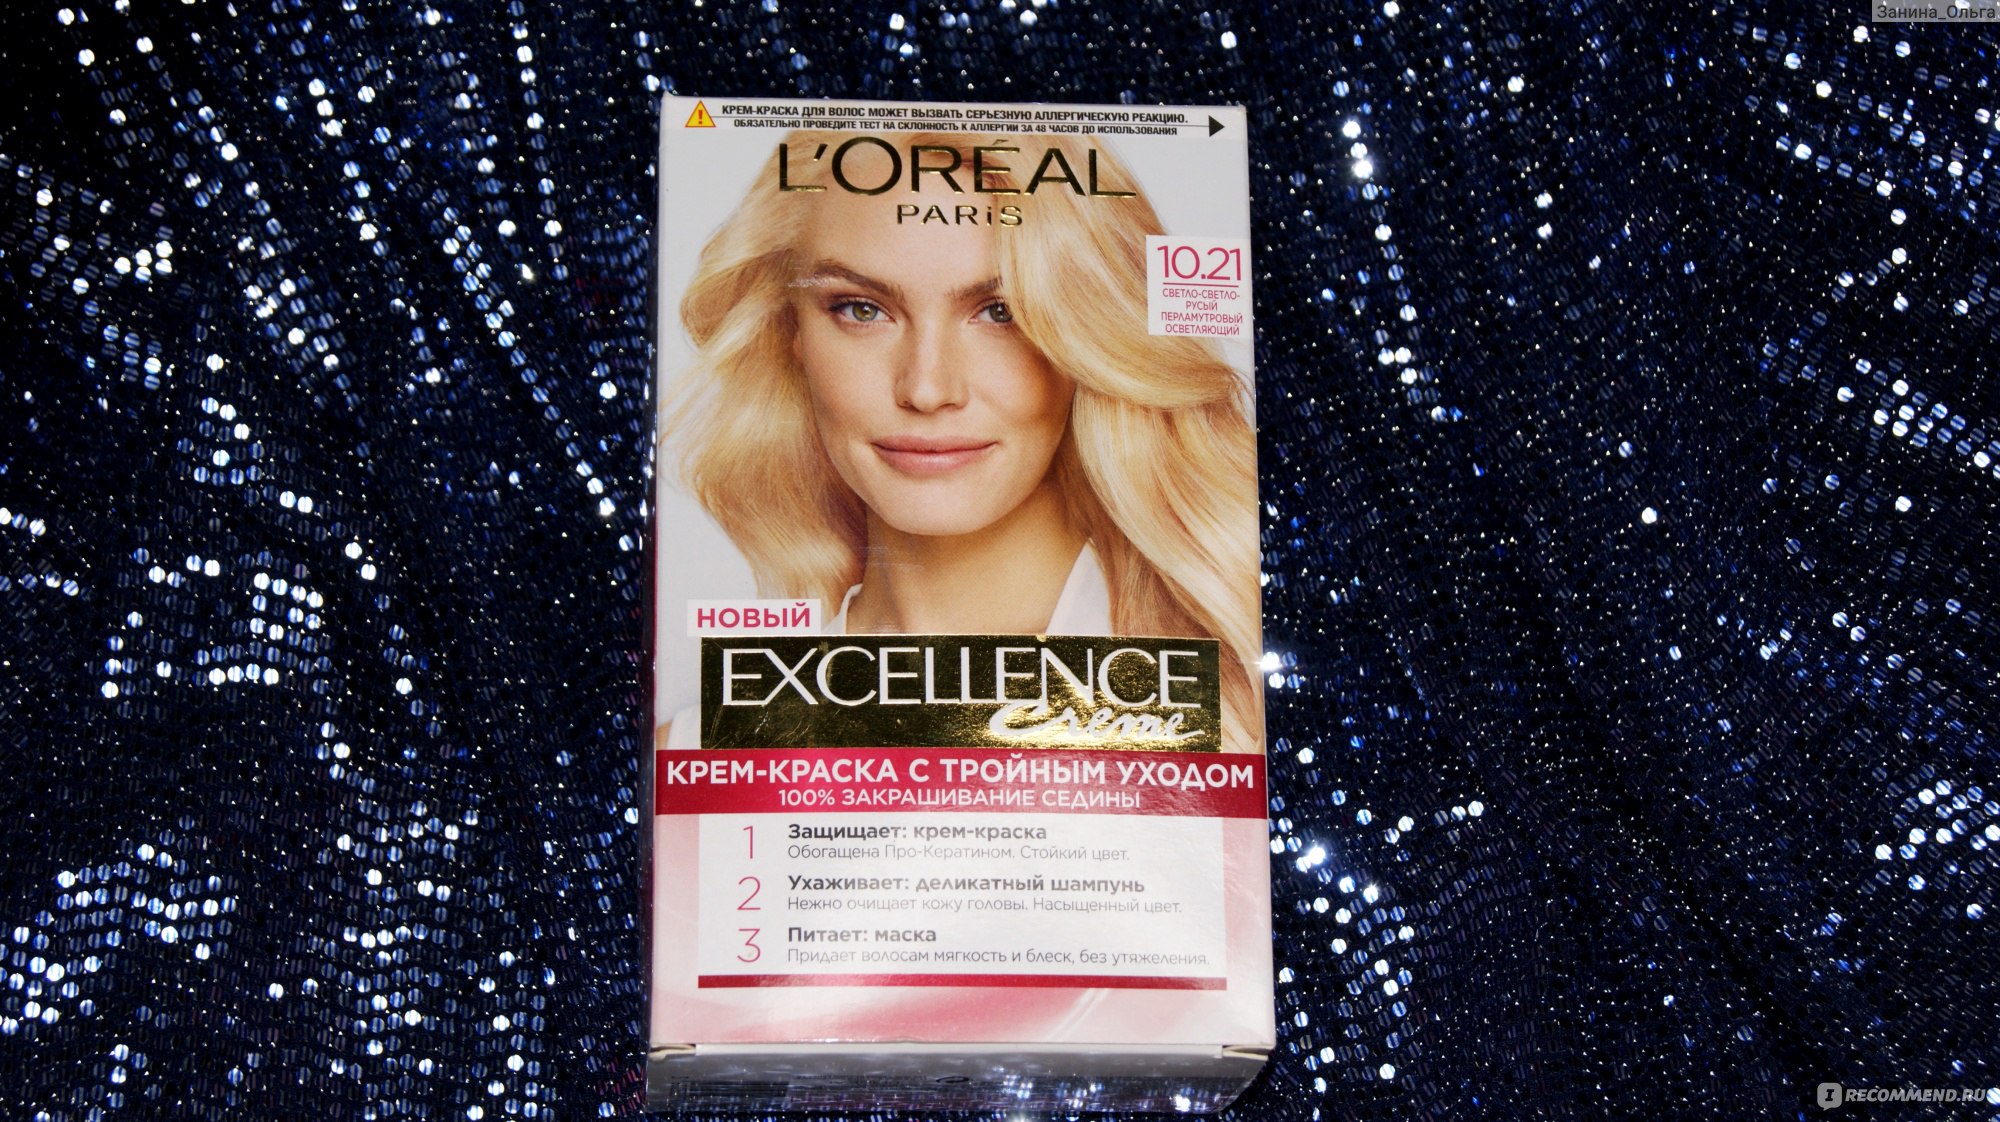 L'Oreal 10.21 Excellence